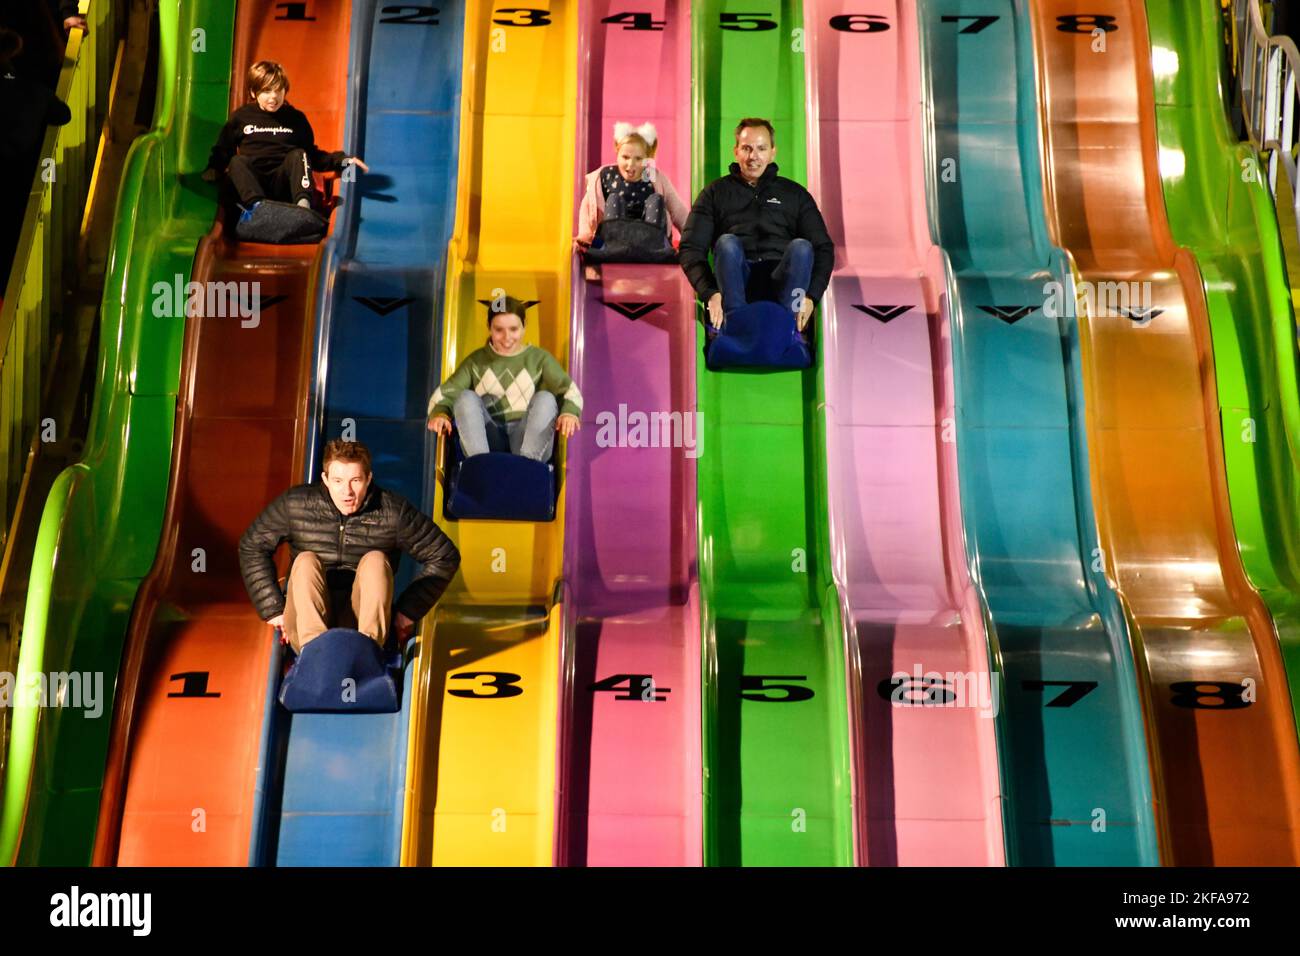 Colourful Giant Slippery Dip Slide at Night Amusement Rides at The Royal Melbourne Show, Melbourne Victoria VIC, Australia Stock Photo